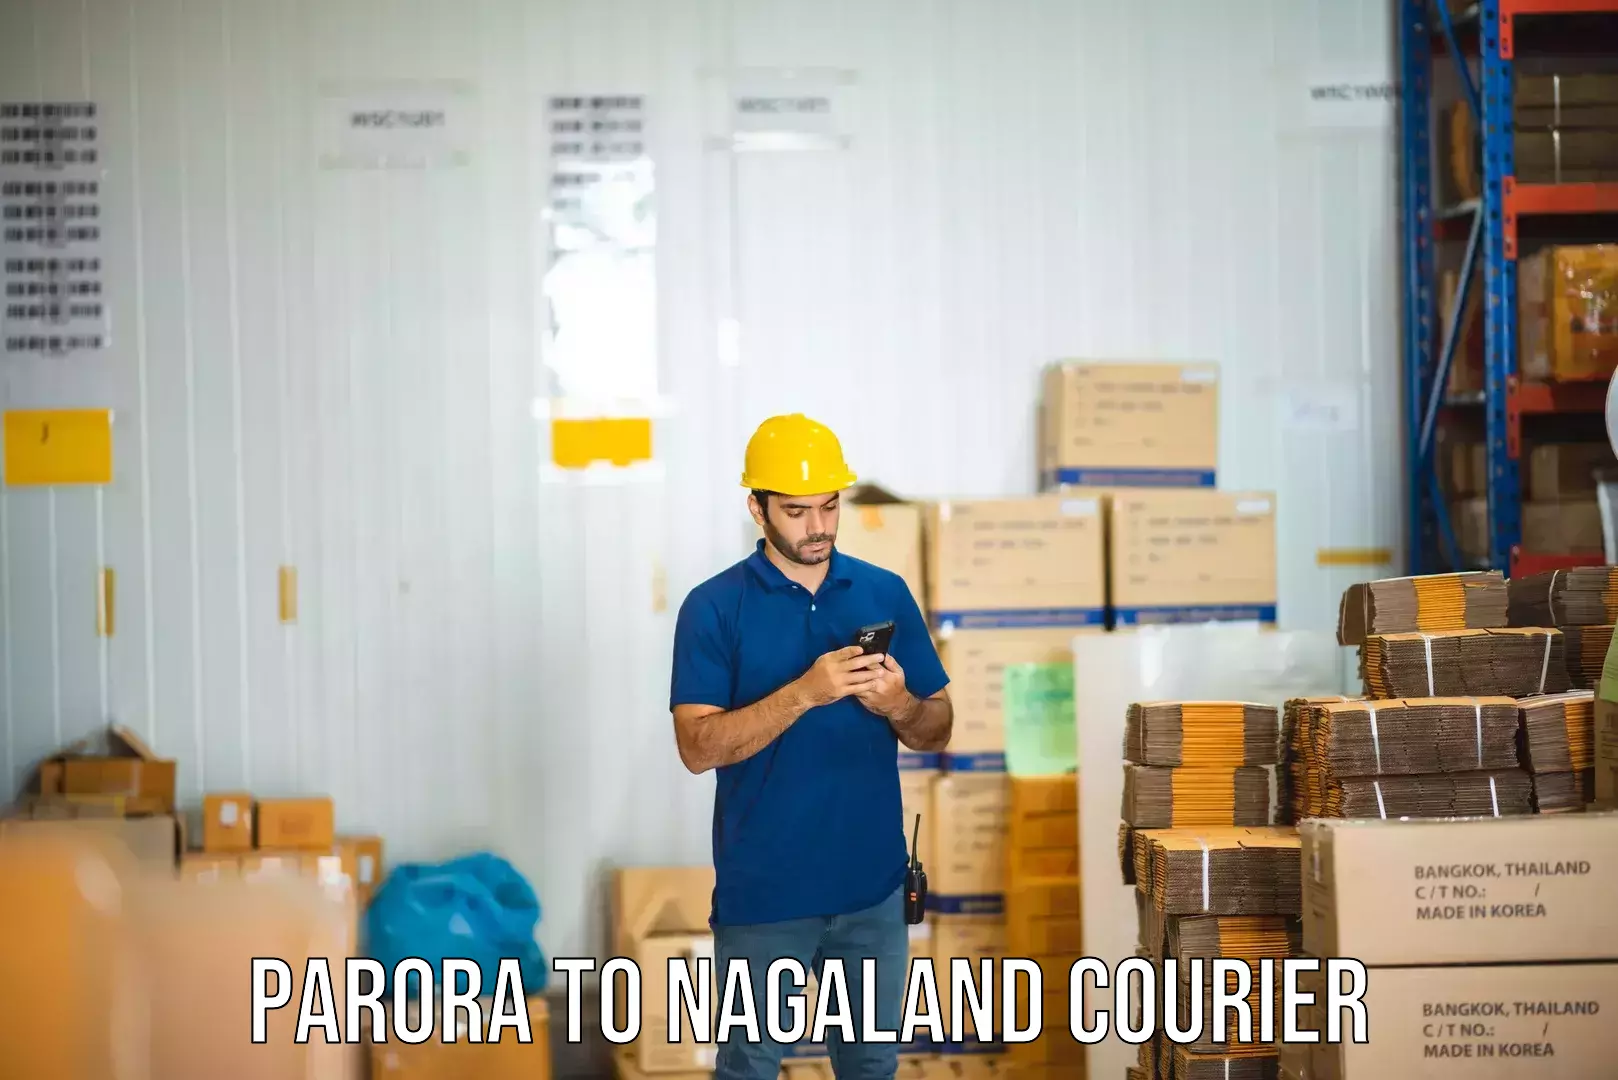 Efficient courier operations Parora to Nagaland